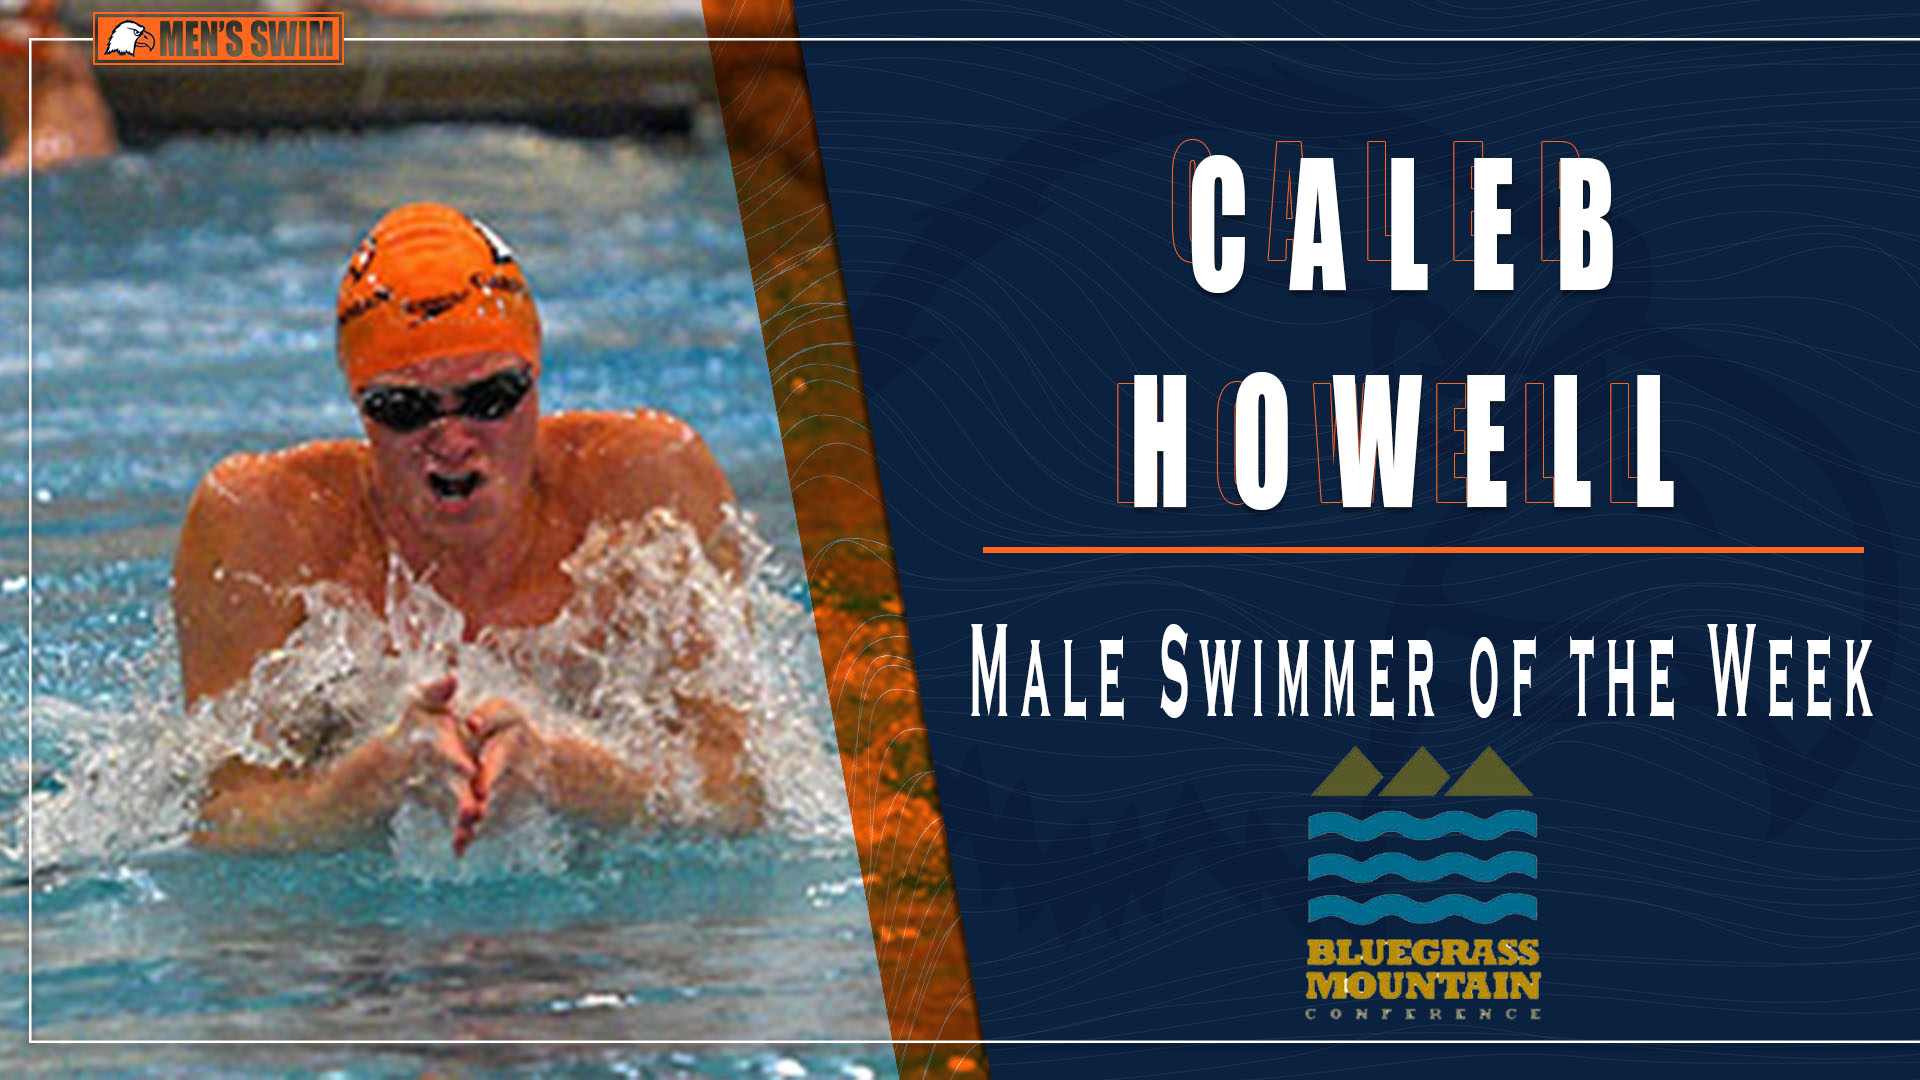 Howell wins first BMC male swimmer of the week award